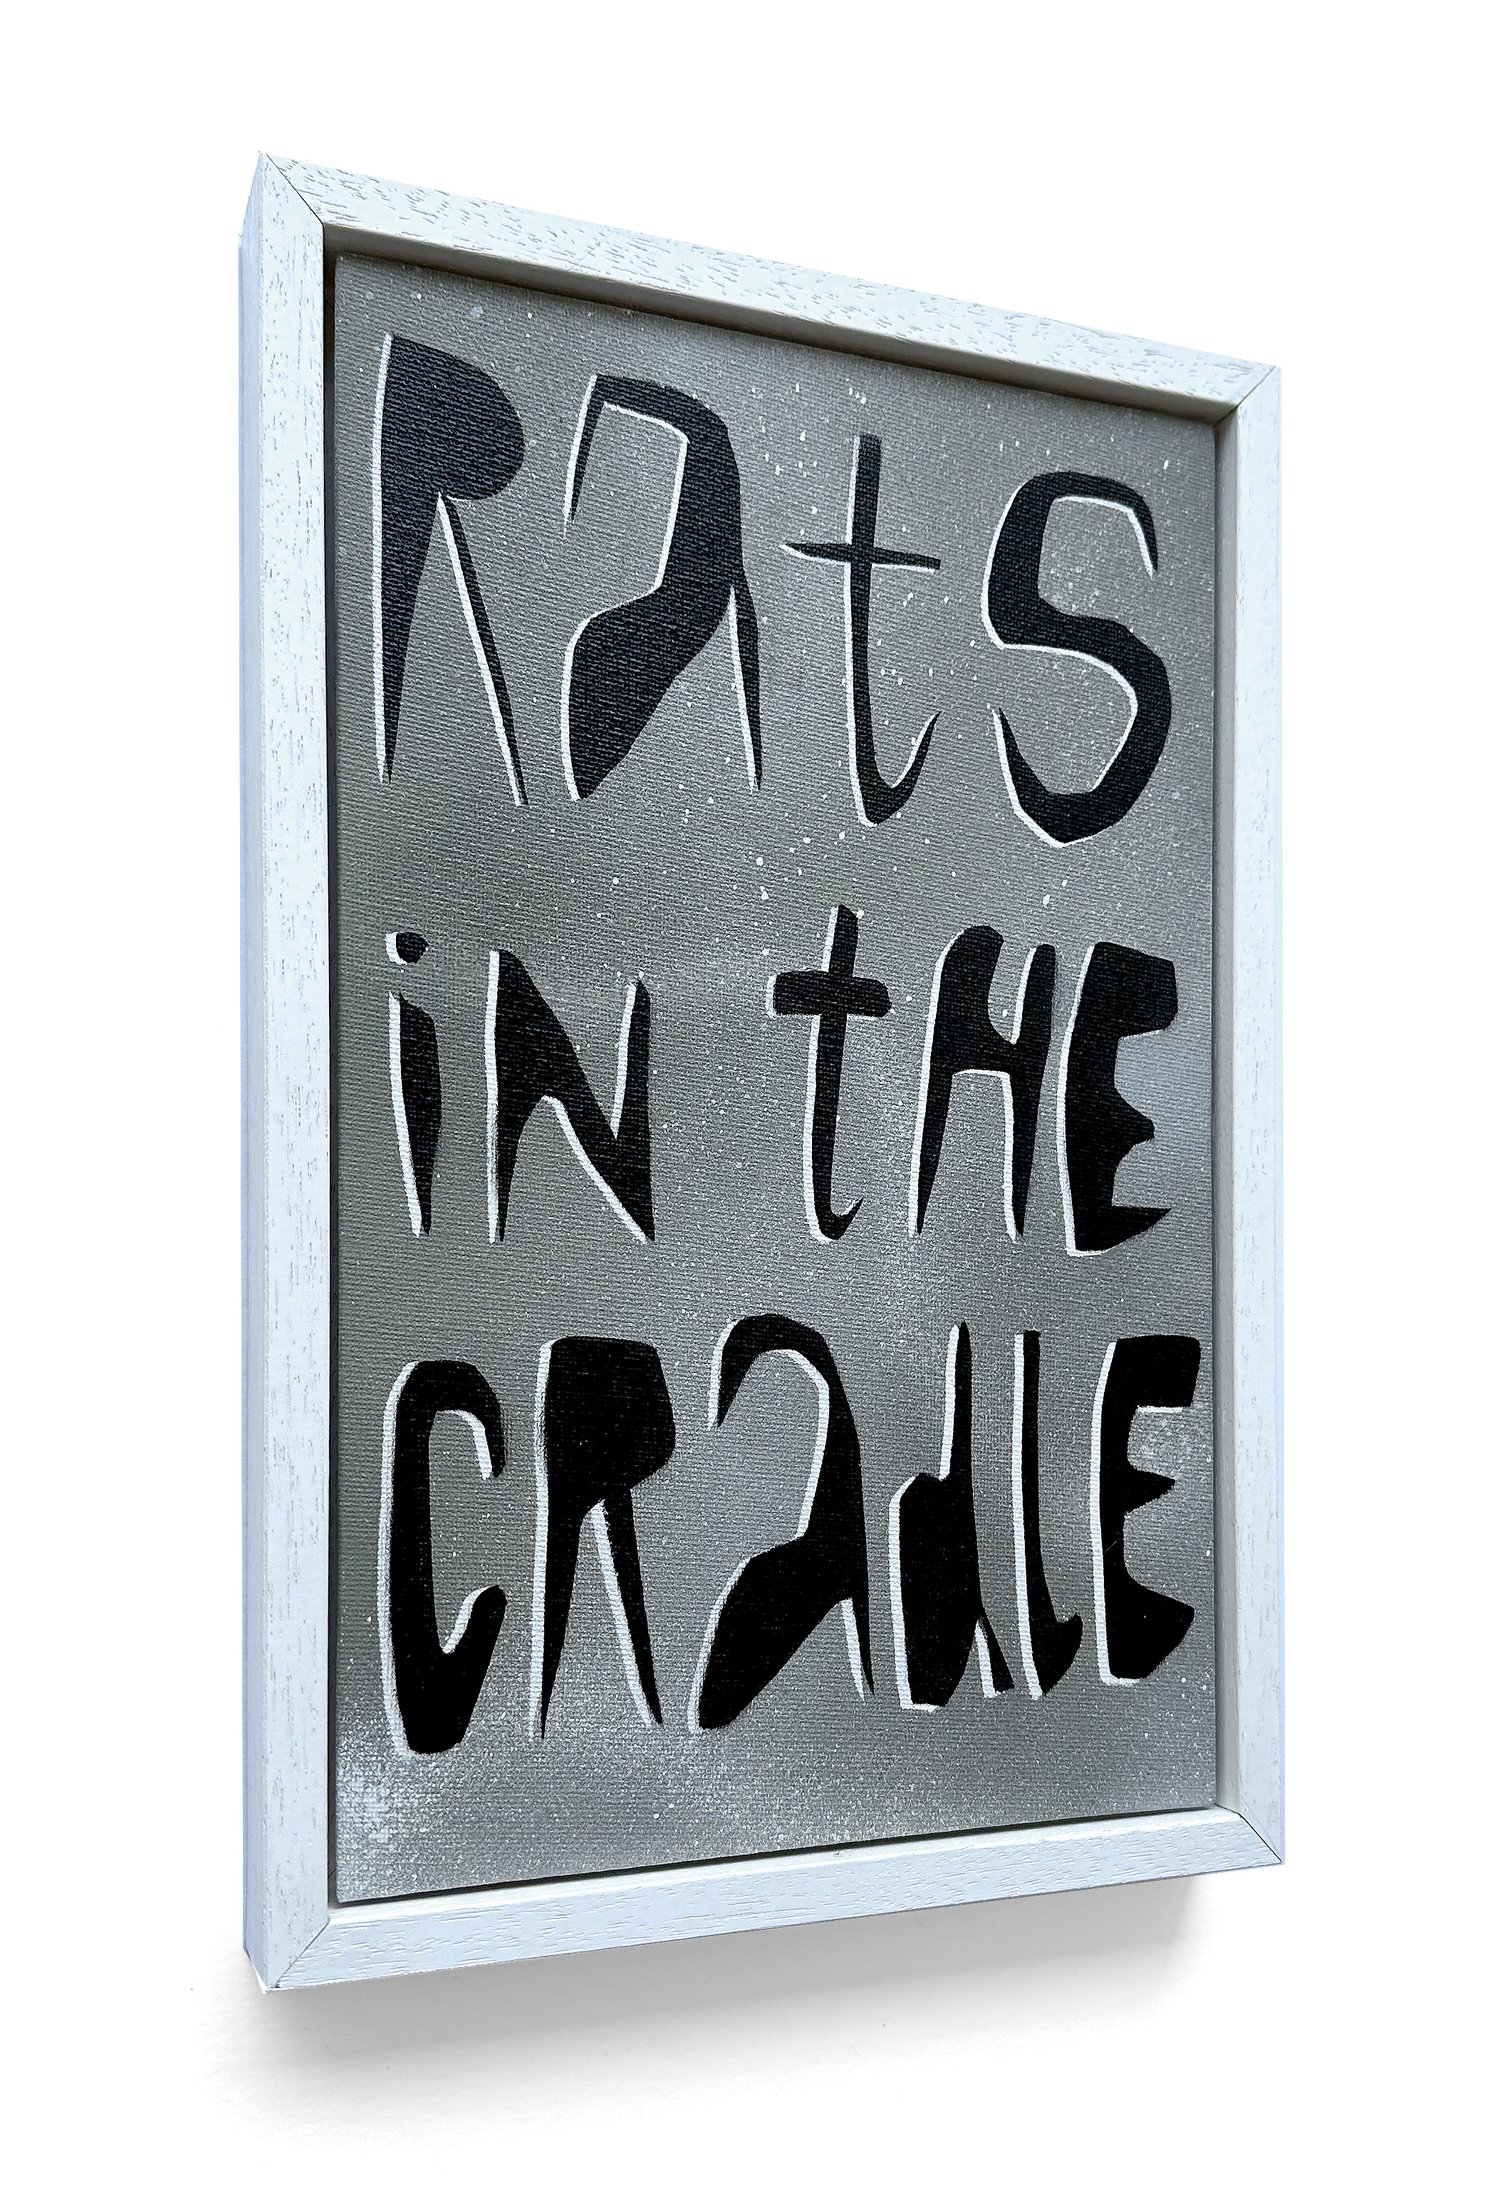 Image of ‘Rats in the Cradle’ by EDWIN